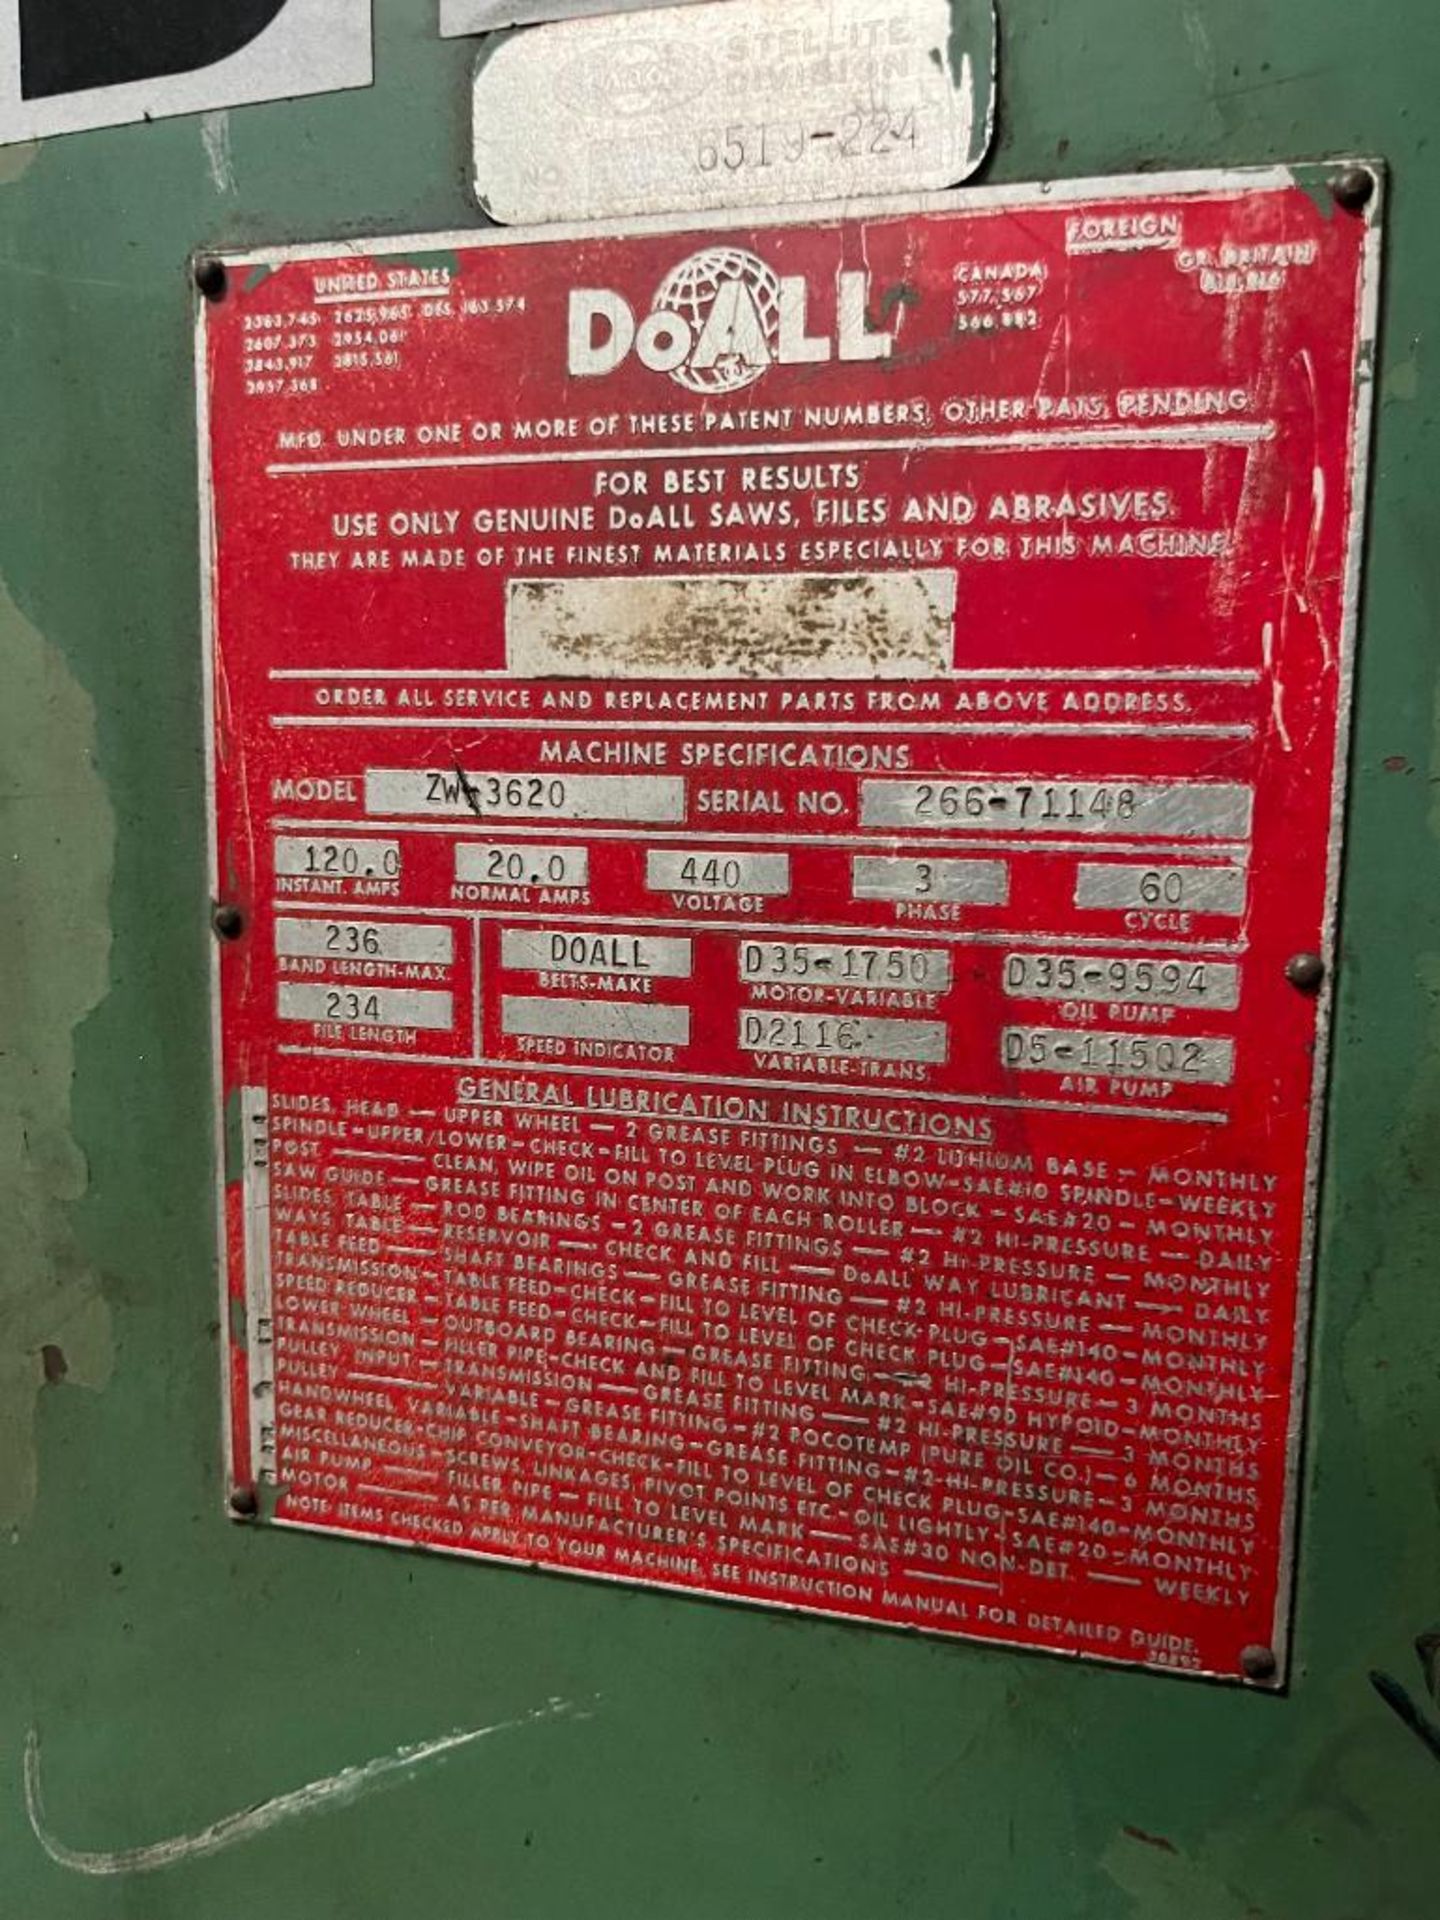 Doall Vertical Band Saw, Model ZW-3620, S/N 266-71148, 16" Cut Height, 36" Width - Image 2 of 3